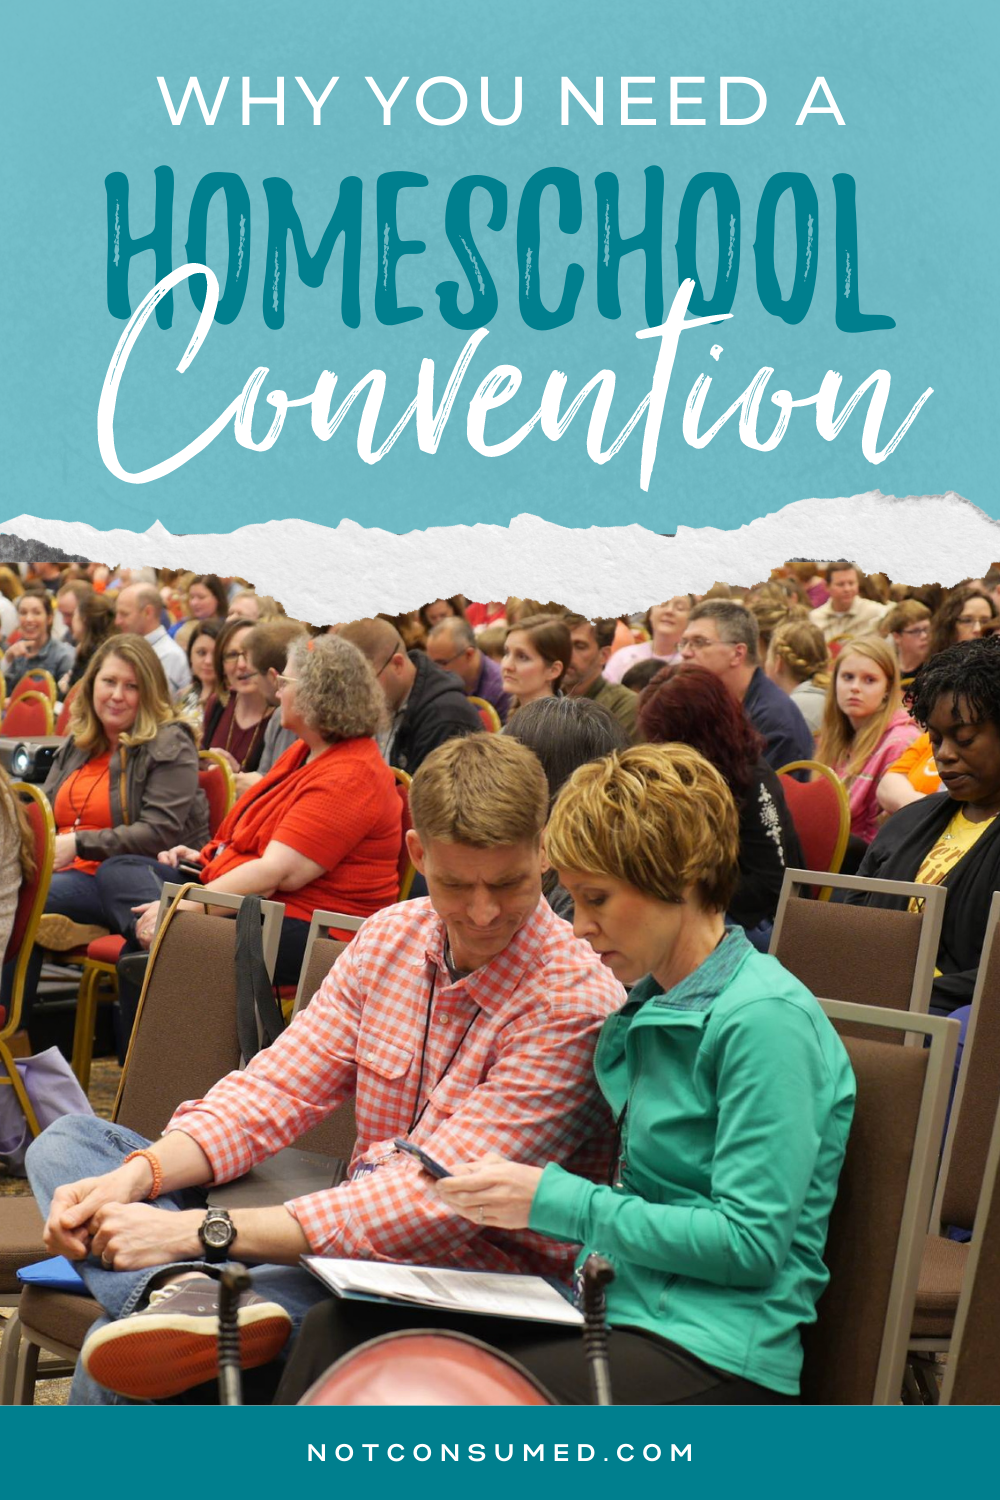 Why you need to go to a Homeschool Convention